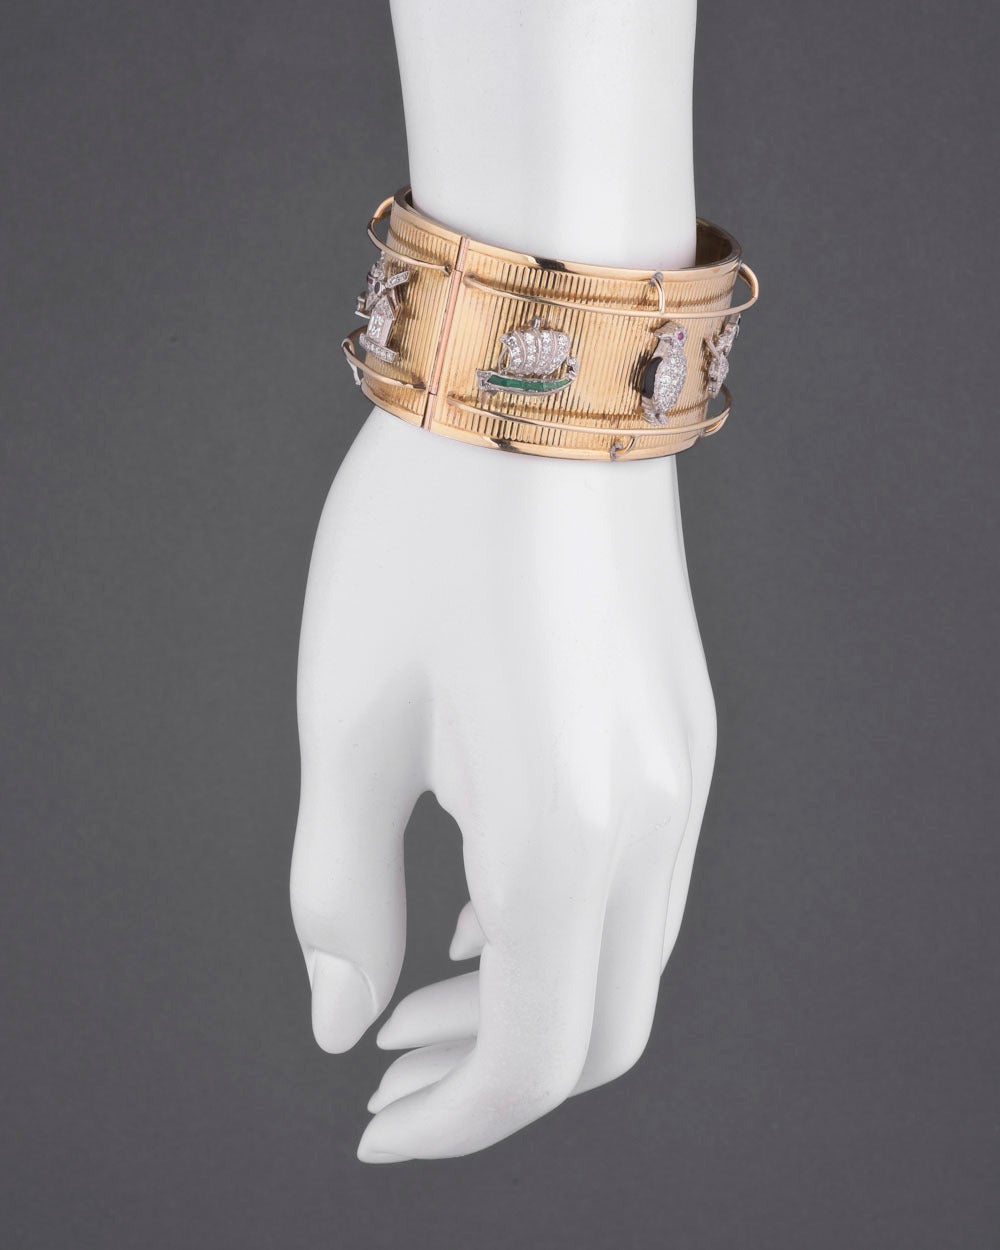 Wide oval-shaped cuff bracelet, set with eight gem-set and platinum Art Deco charms spaced evenly around the cuff, the charms including a stork carrying a baby, kangaroo, tea pot, windmill, boat, penguin, witch and bellhop, the cuff in 14k yellow